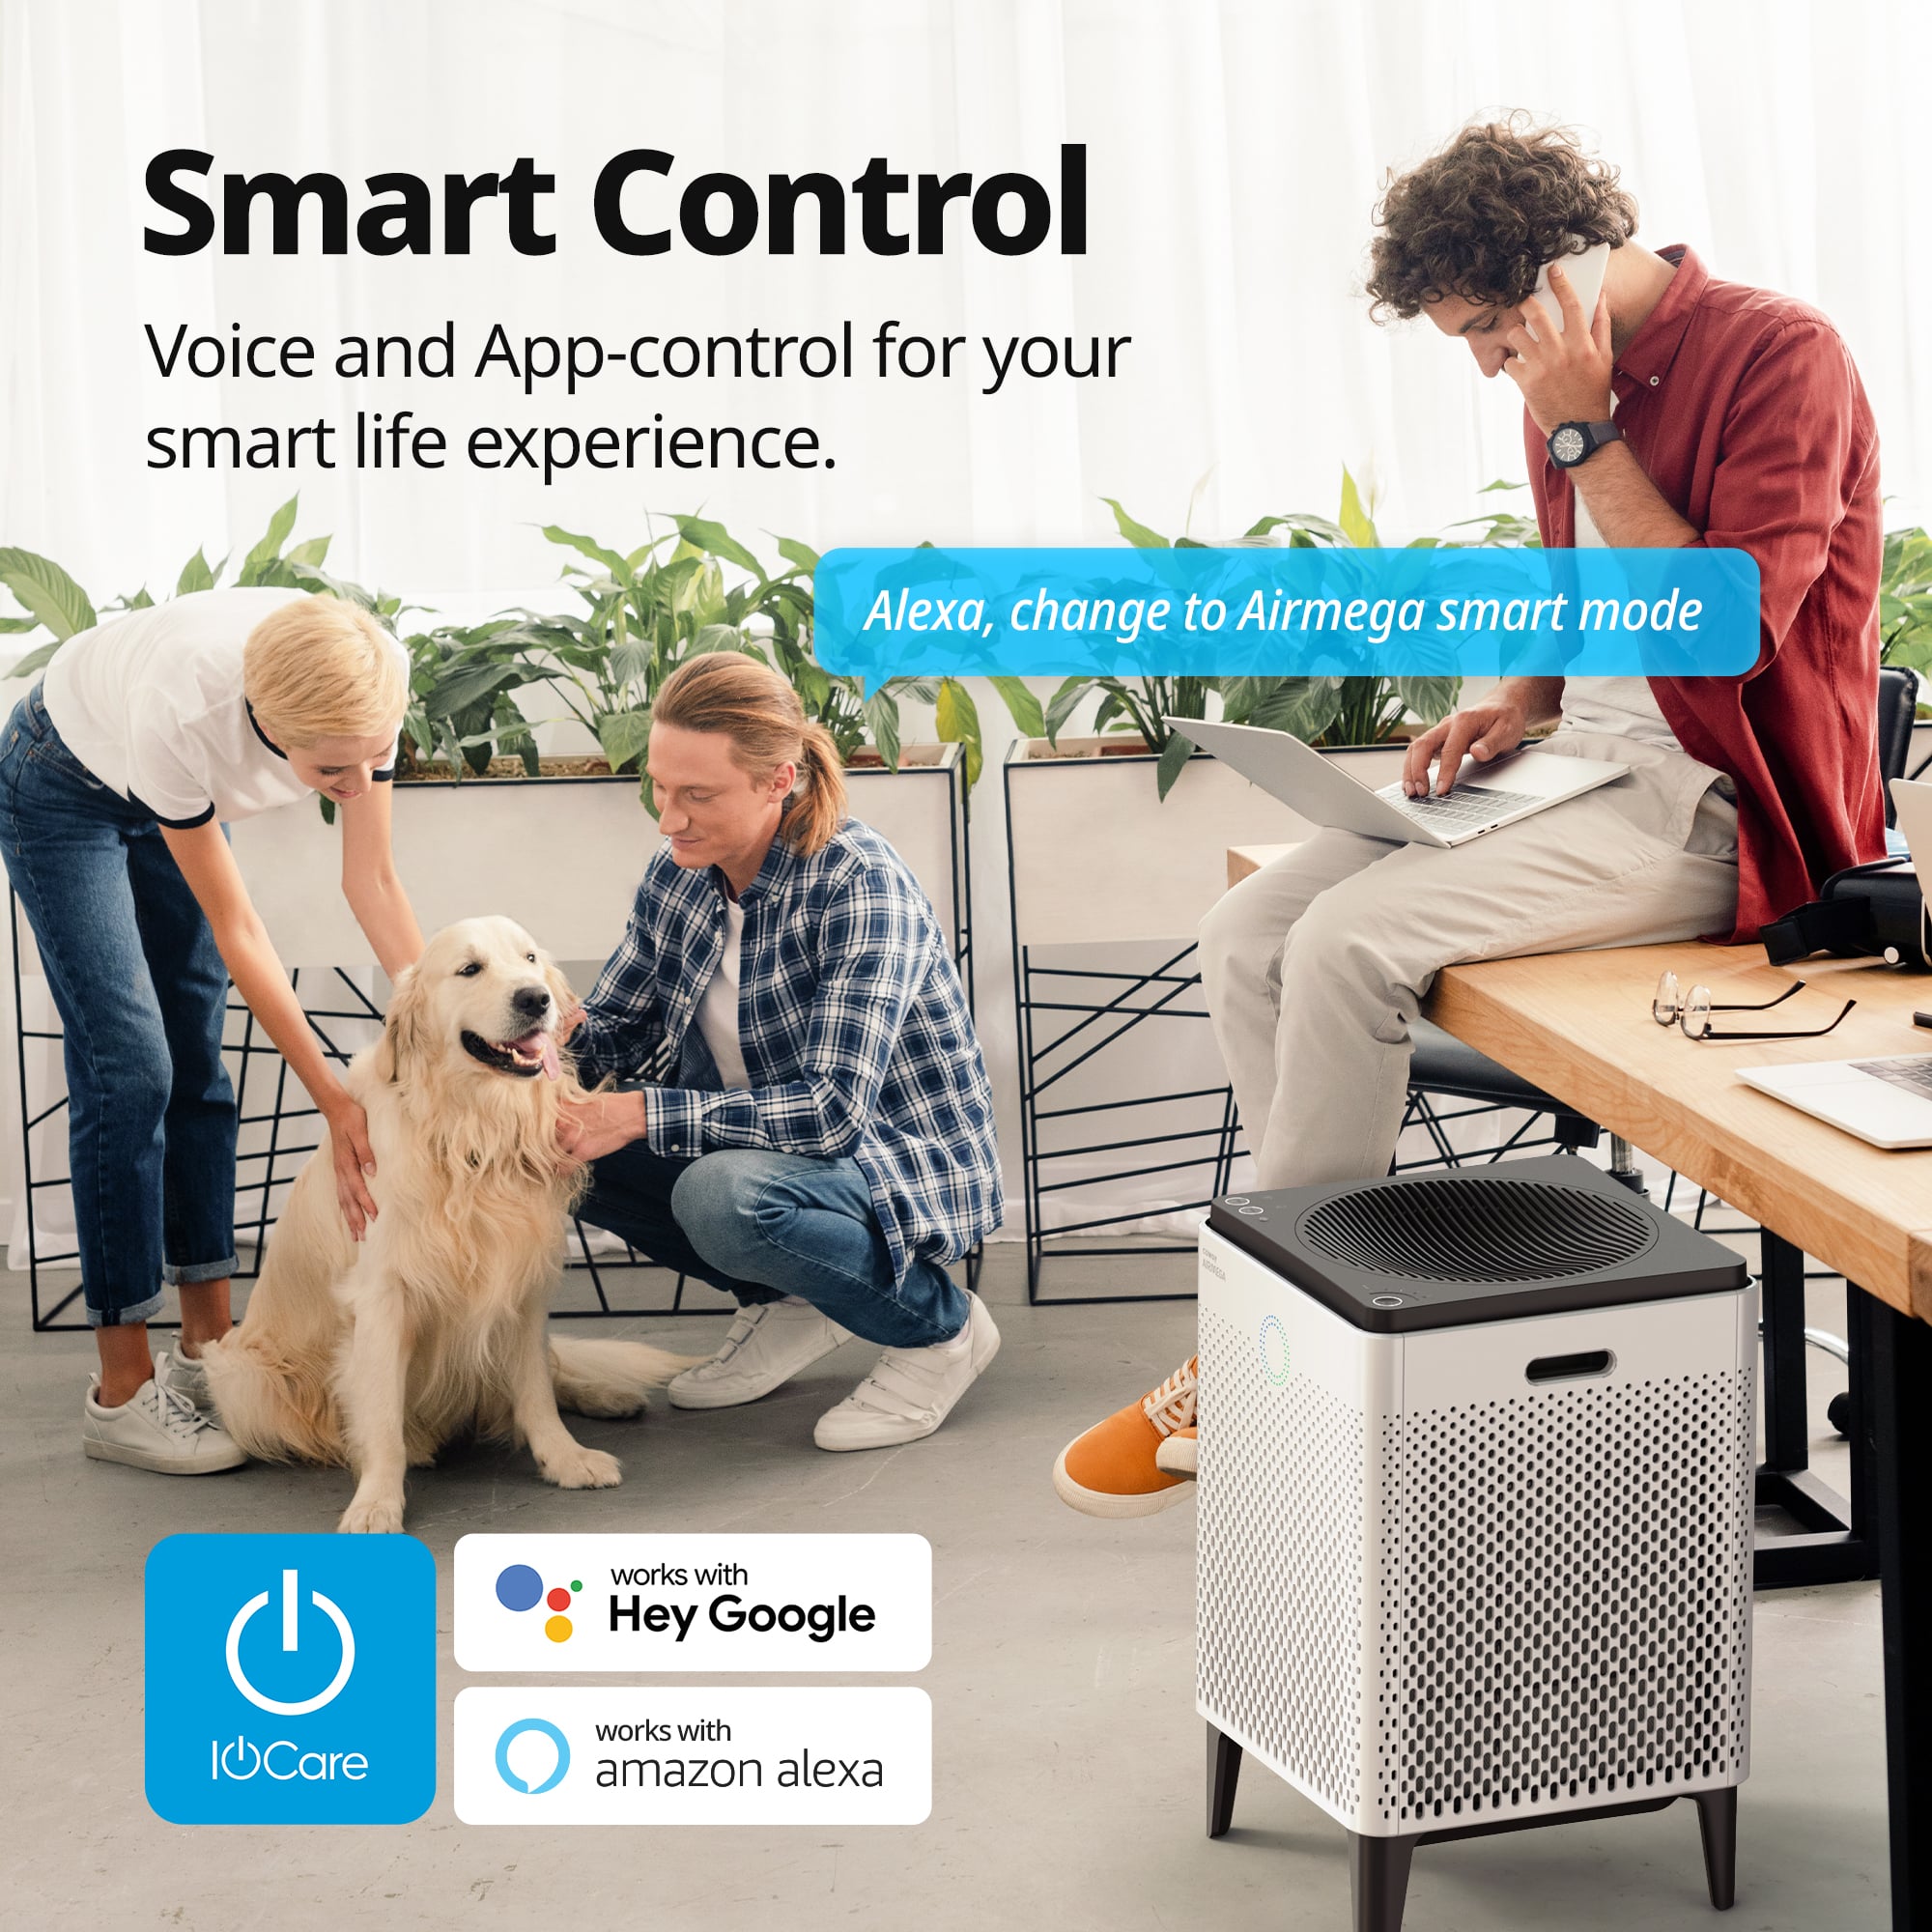 Voice and App-control